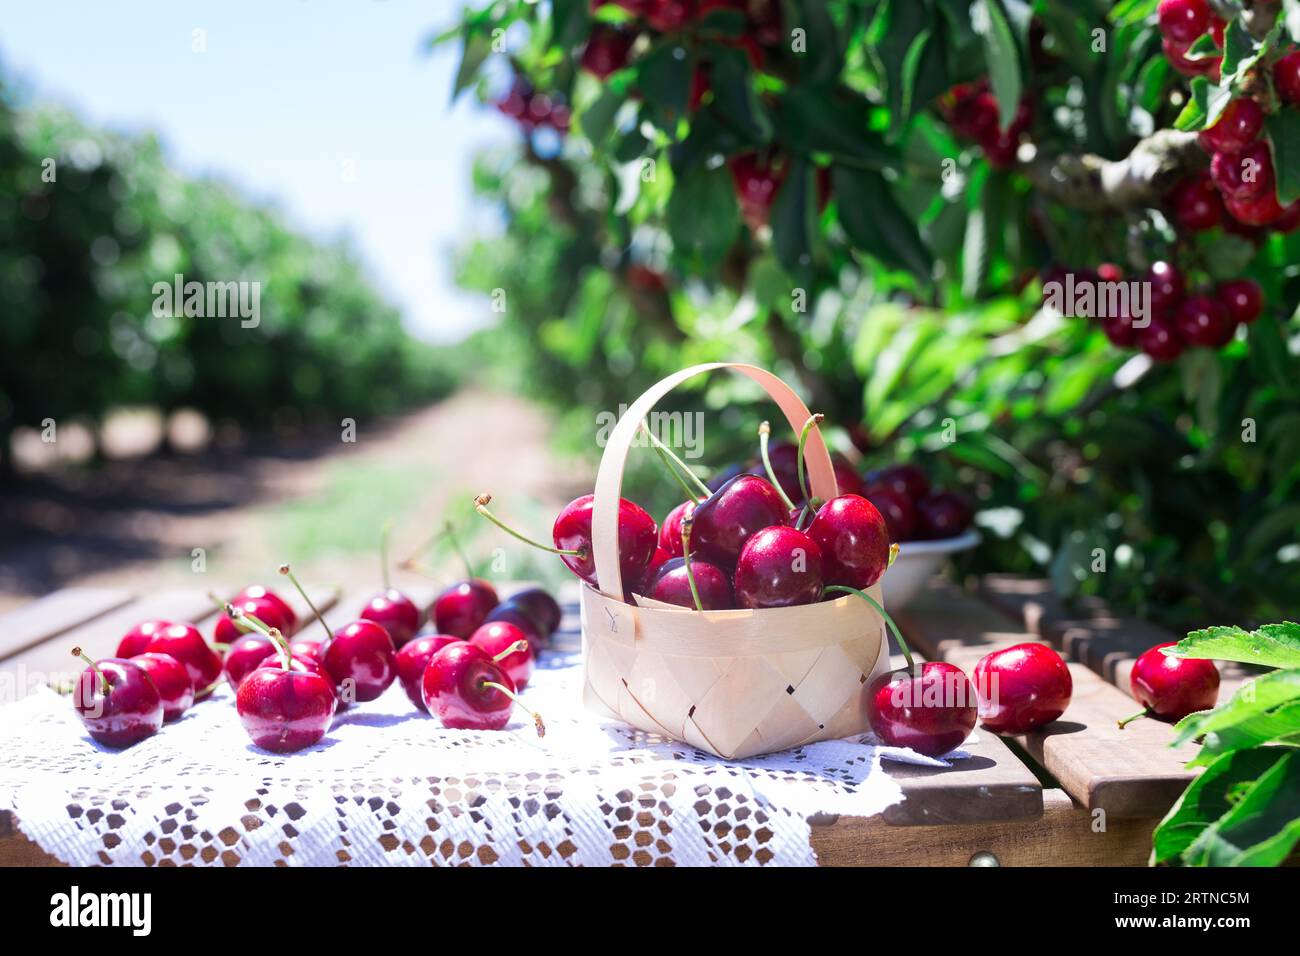 Ripe juicy cherry berry in wicker basket on lace napkin on table in cherry garden Stock Photo